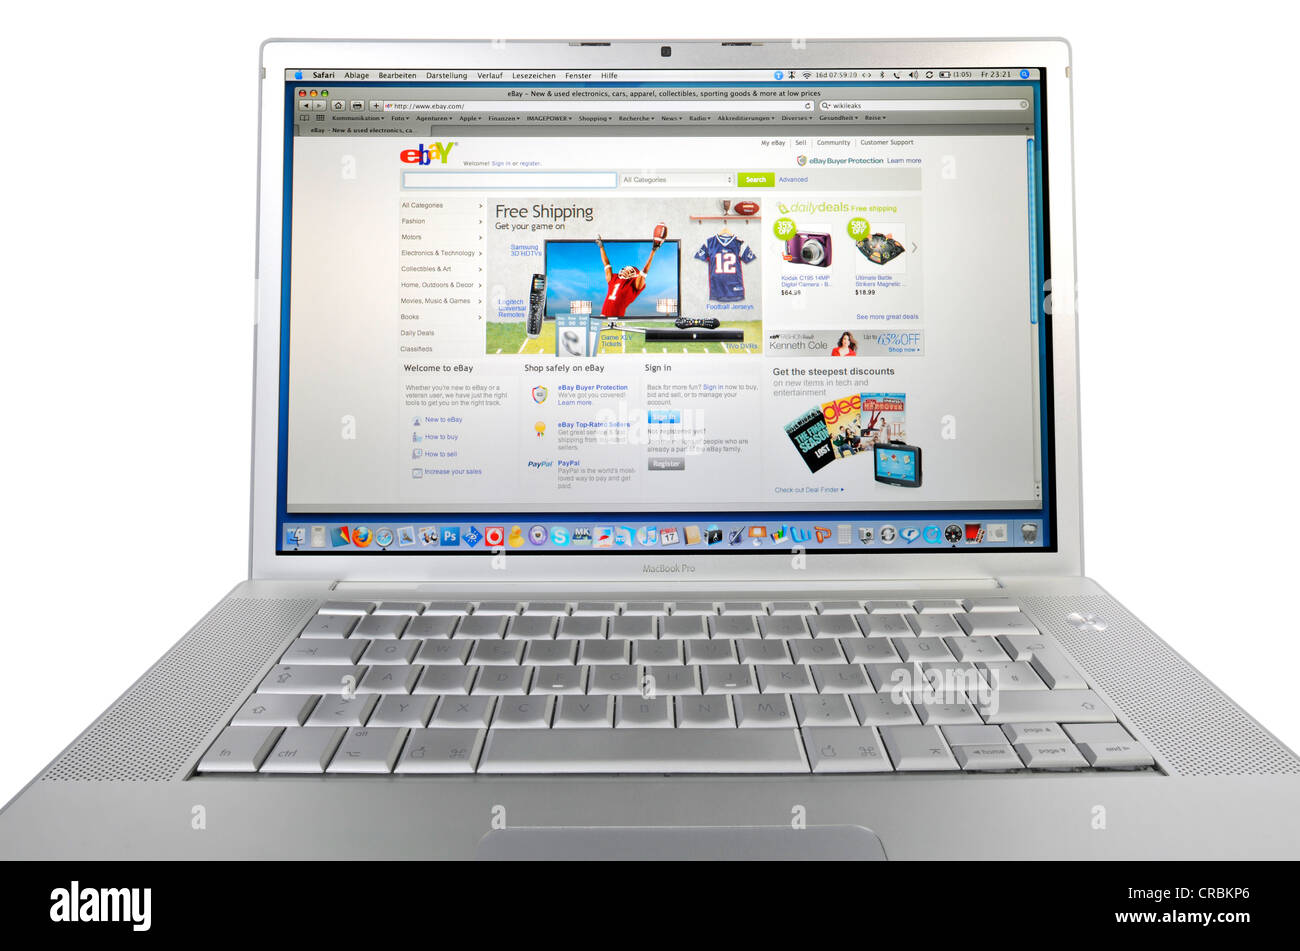 Ebay.com, online shopping, displayed on an Apple MacBook Pro Stock Photo